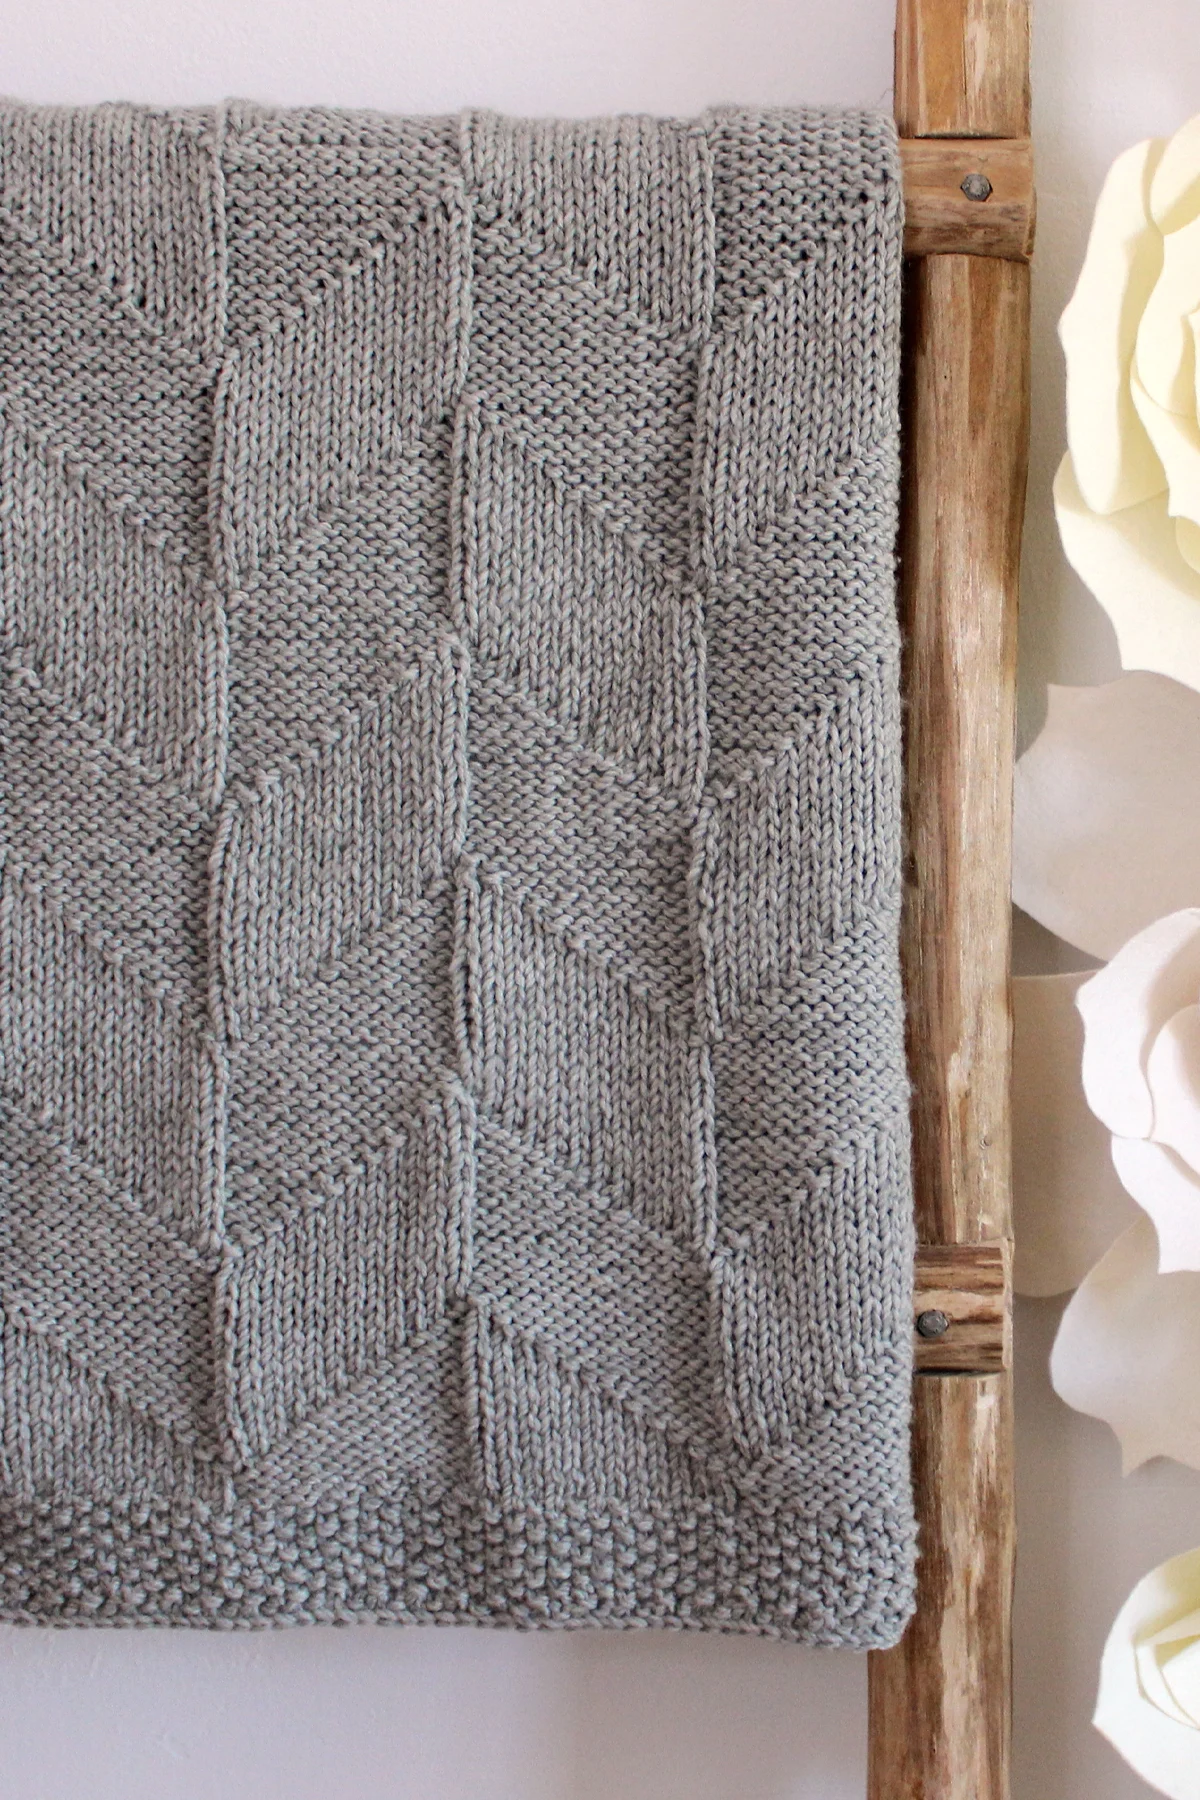 Point Reyes Blanket designed by Studio Knit in grey colored yarn displayed on ladder.